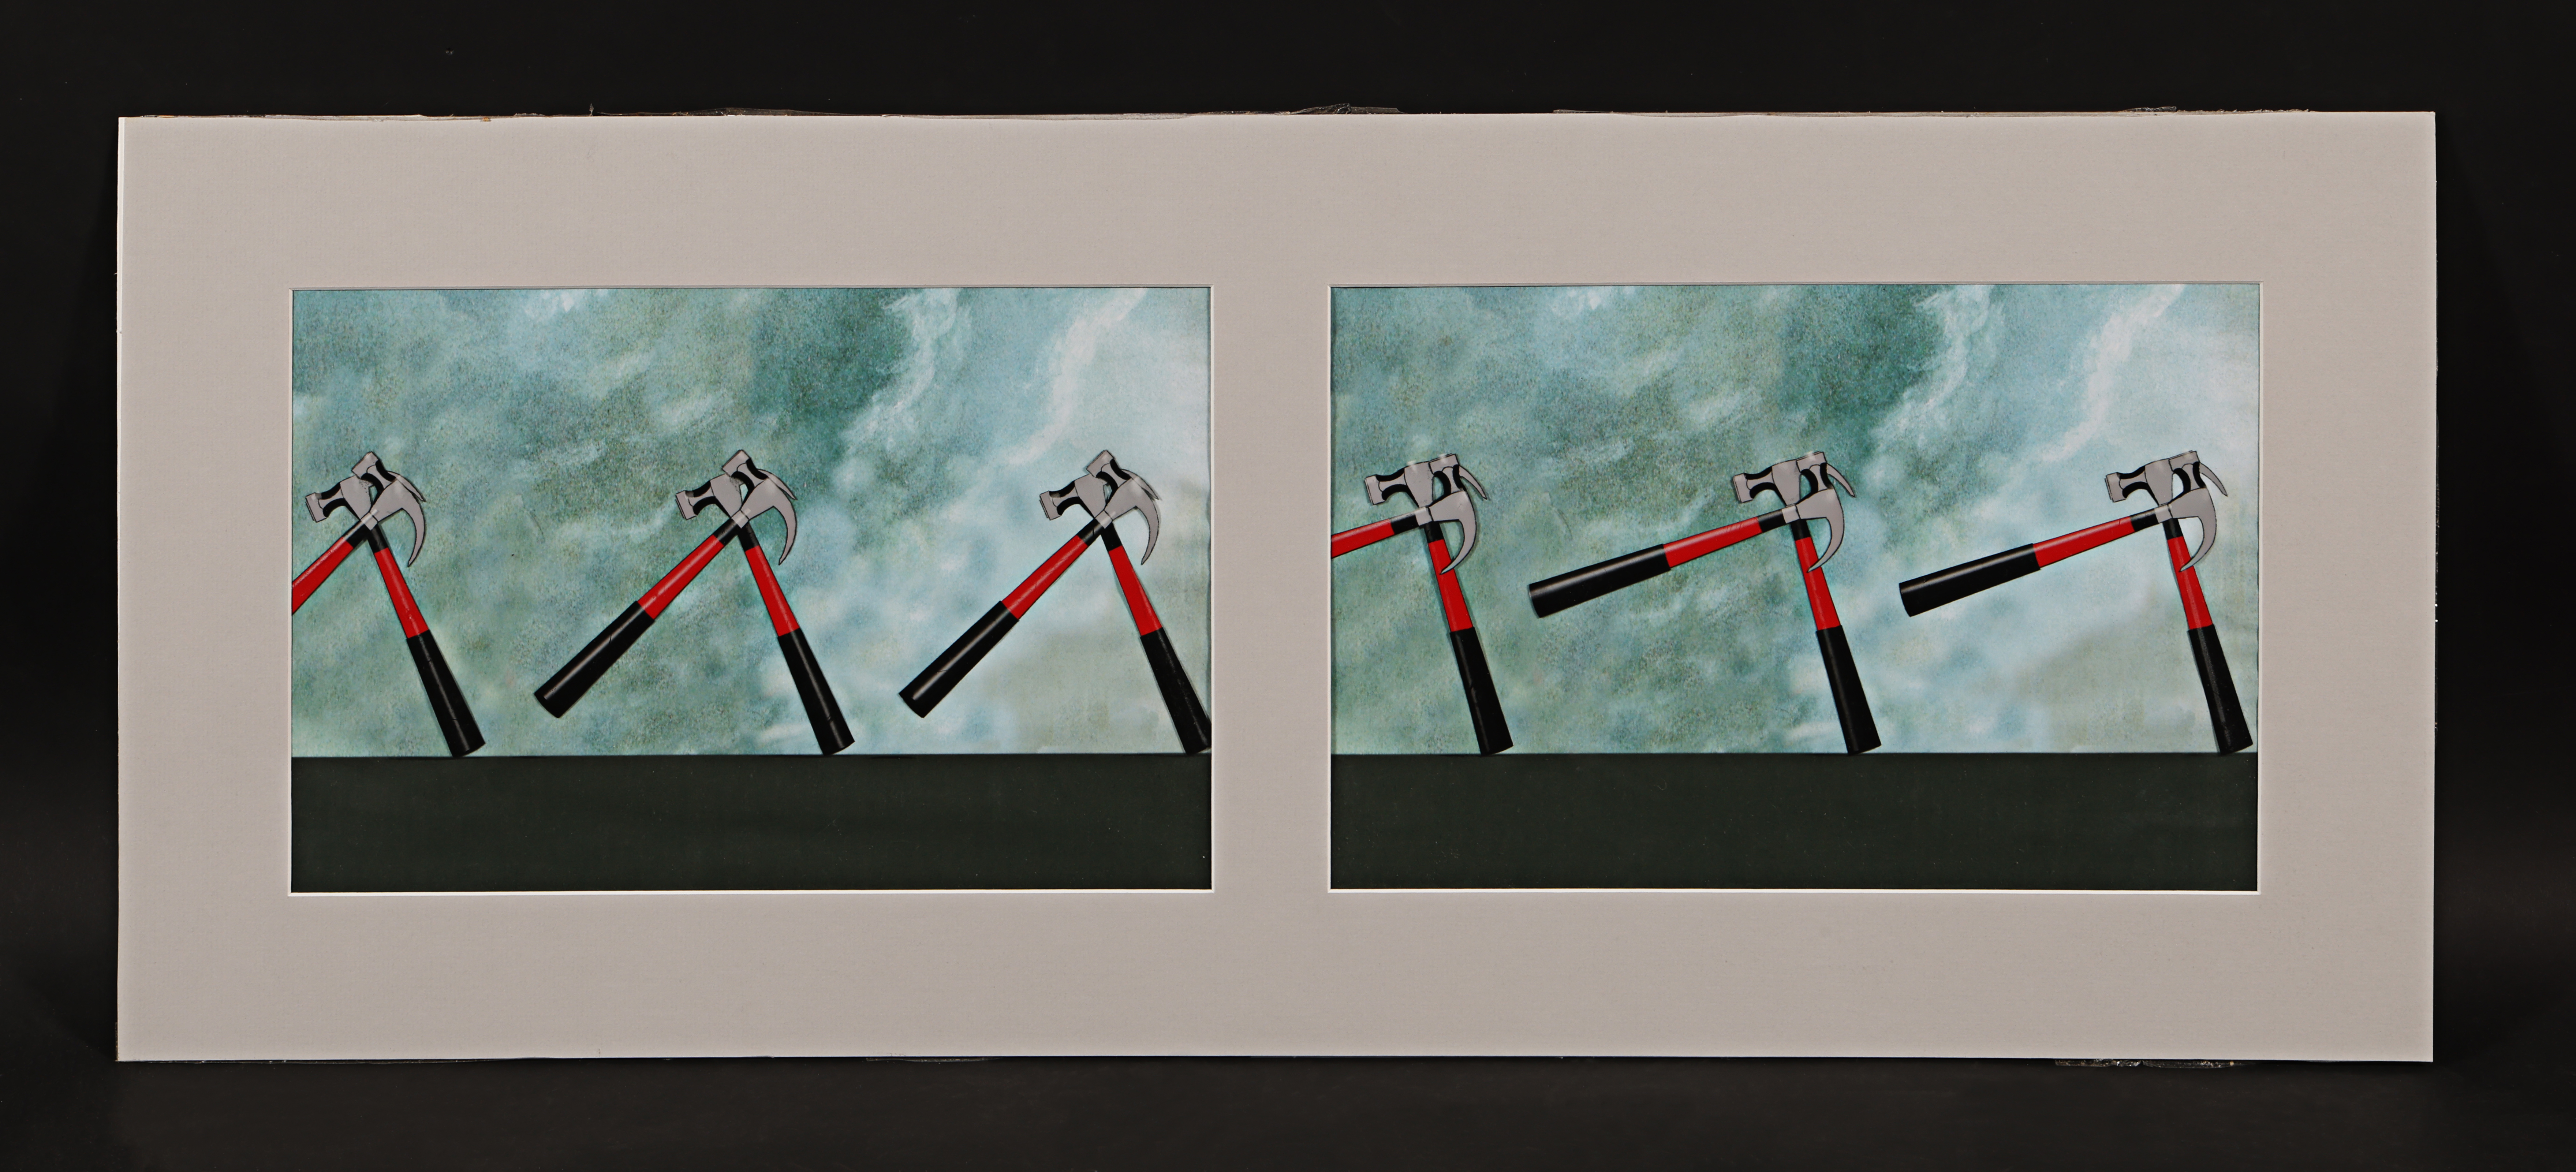 PINK FLOYD: THE WALL (1982) - Original Marching Hammers Animation Cels, 1982